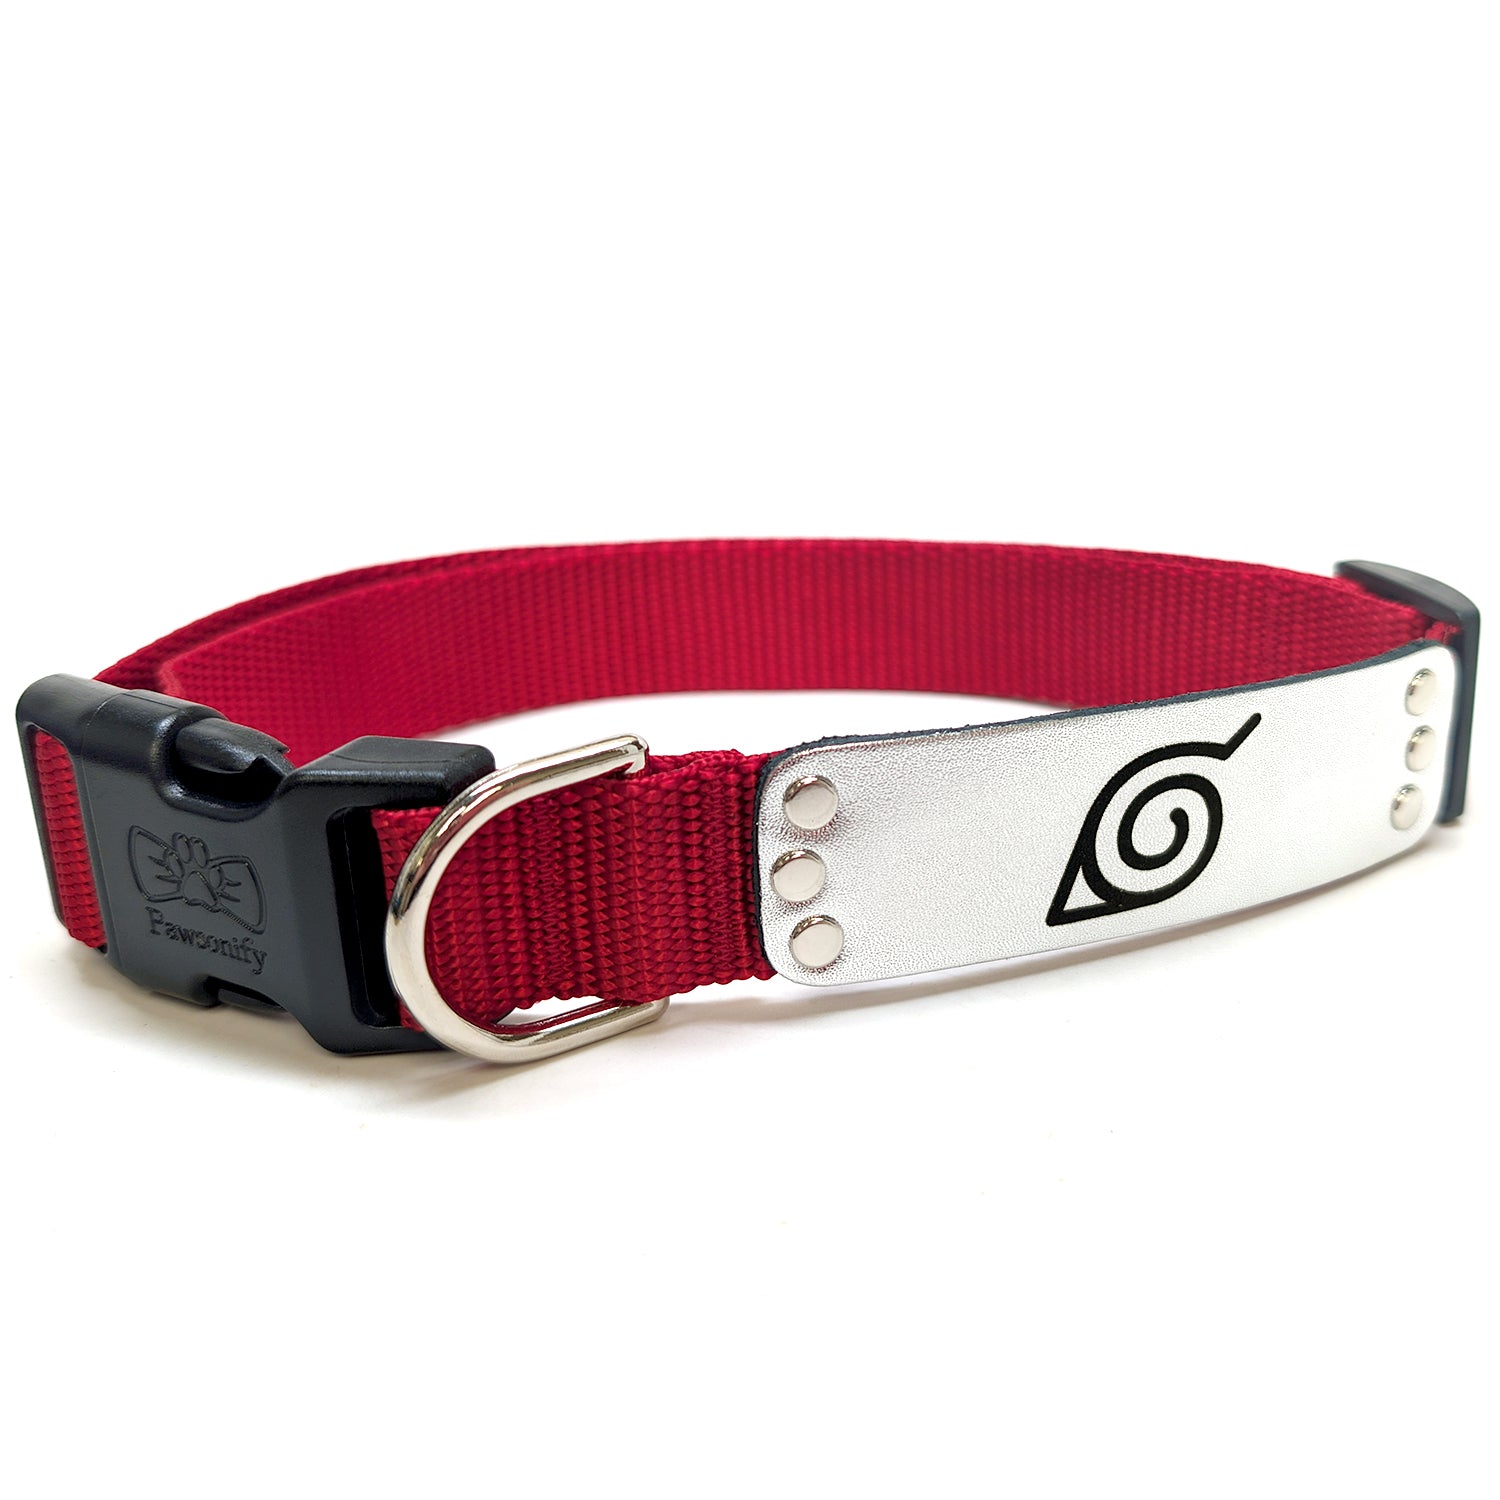 Naruto Shippuden x Pawsonify - Officially Licensed Ninja Collar (Red) for Large Dogs #size_Dog: (L) 18-26